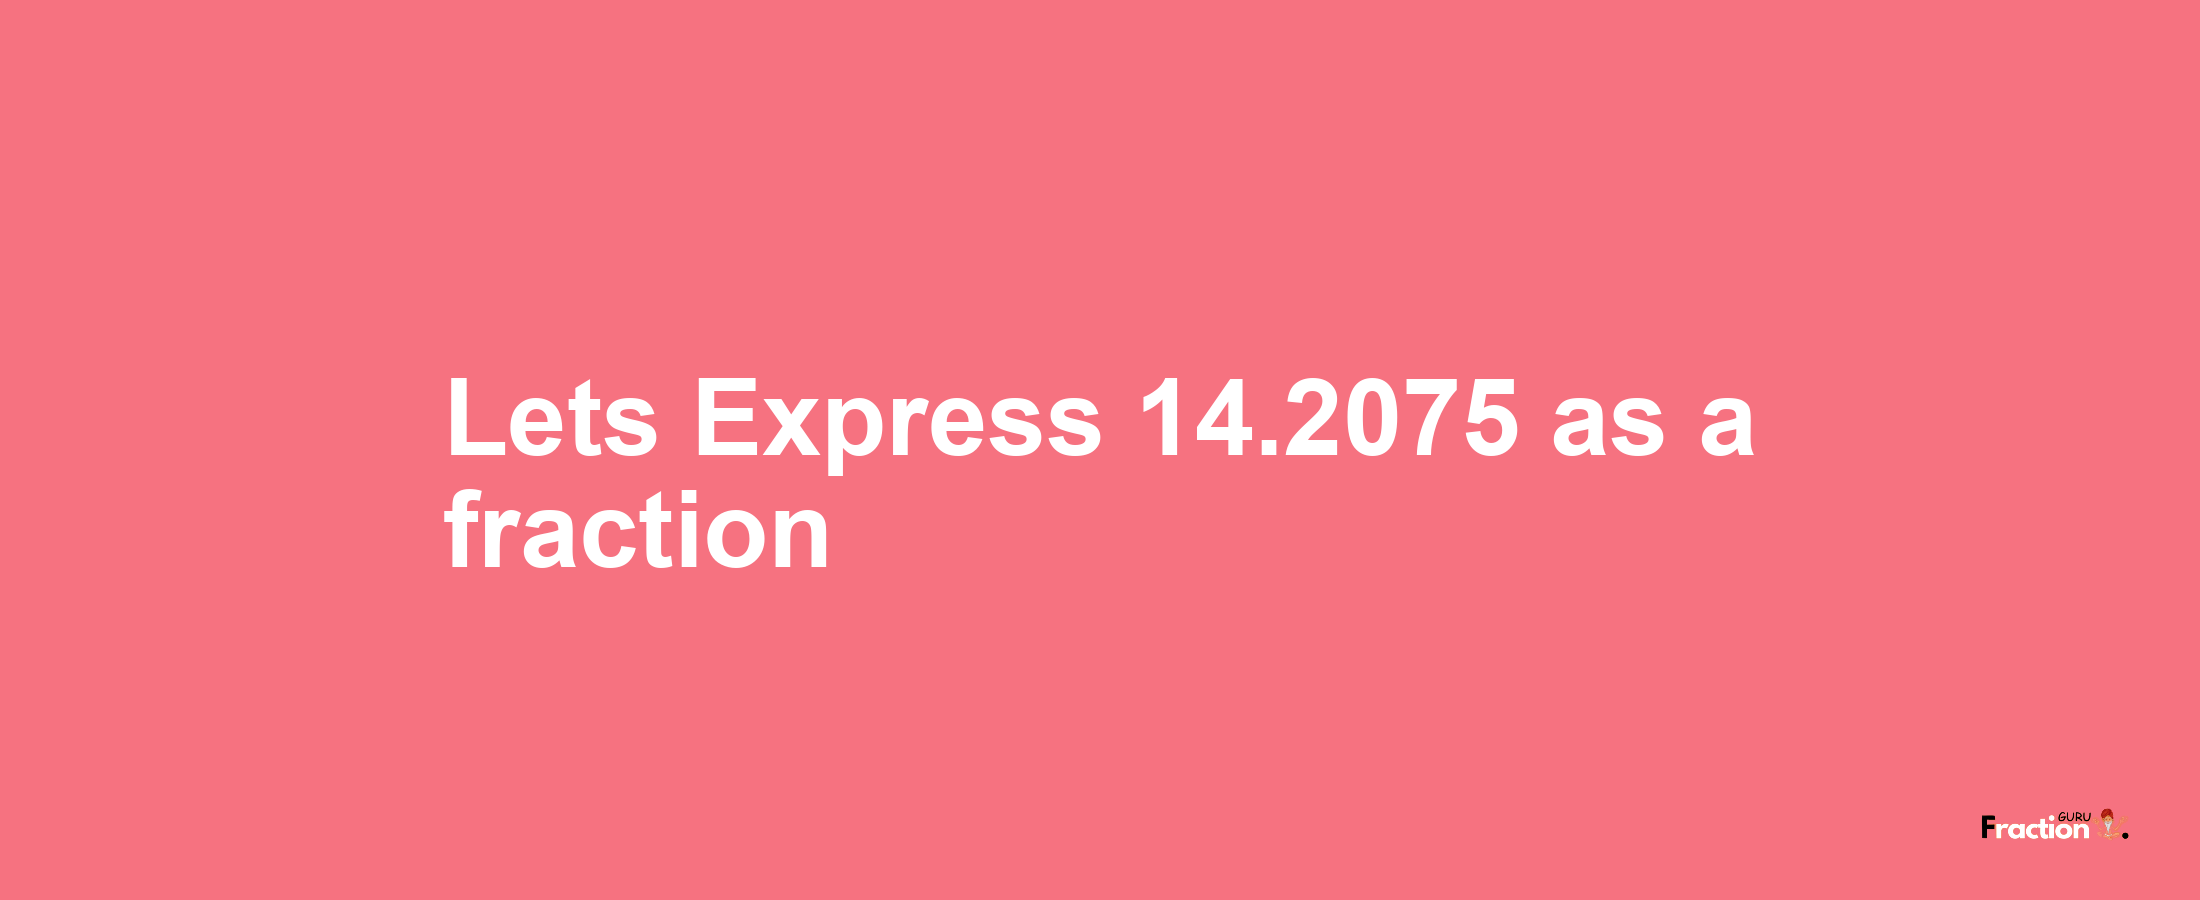 Lets Express 14.2075 as afraction